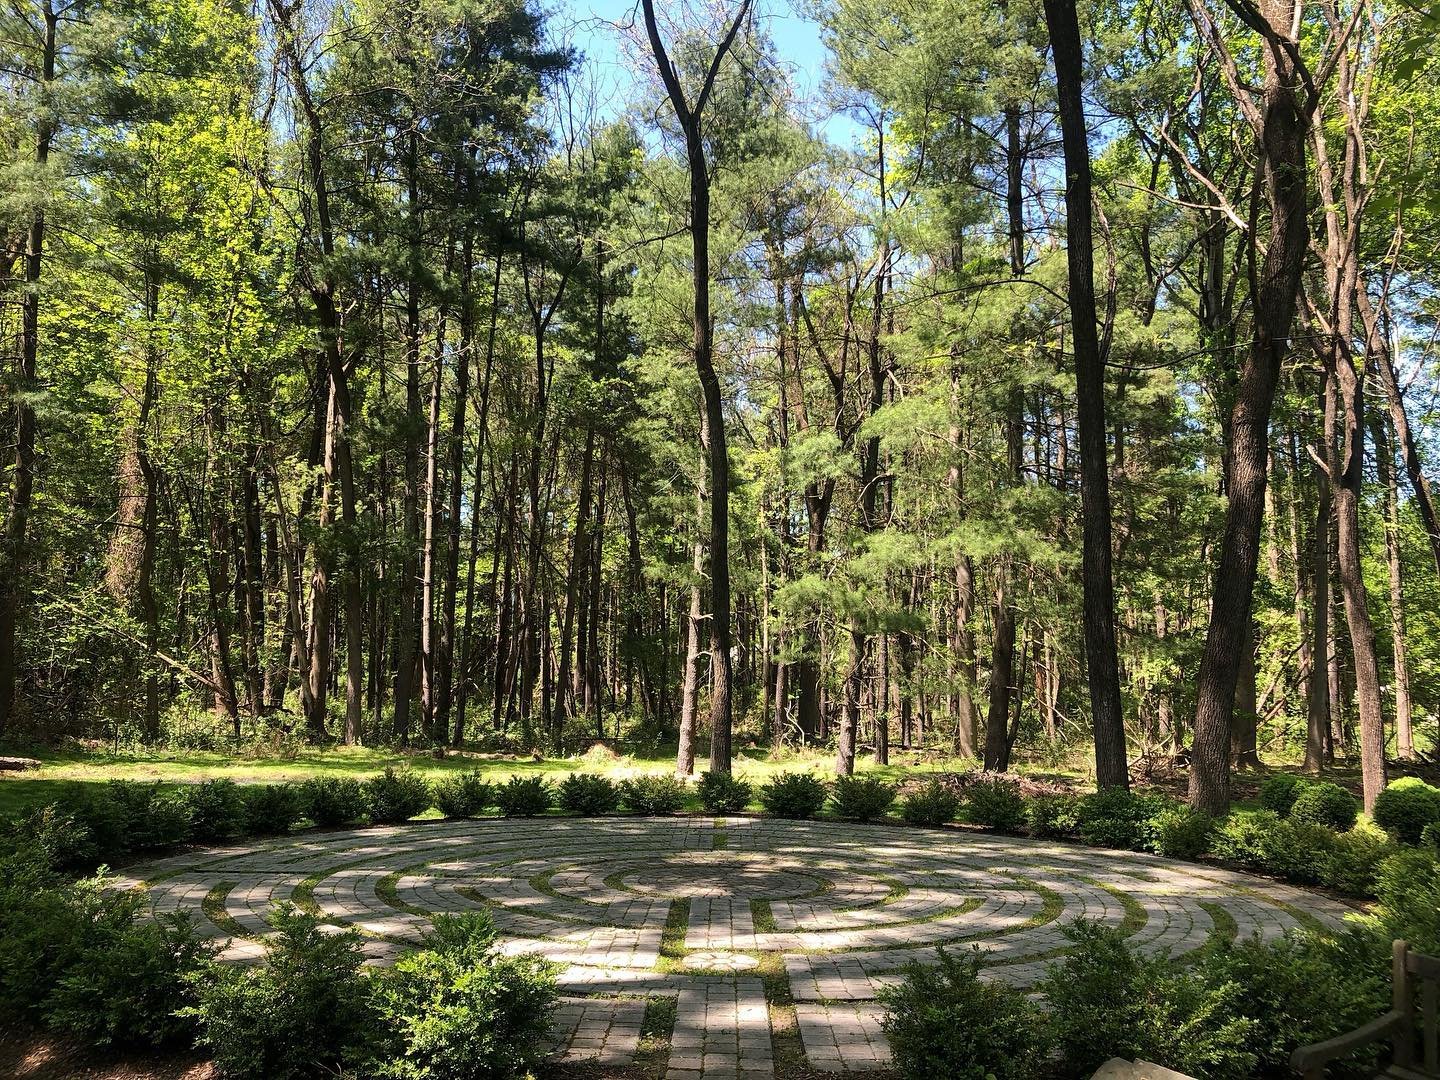 A pitch-perfect spring day. Walked a labyrinth beneath the trees, reflecting on betwixt and betweens.